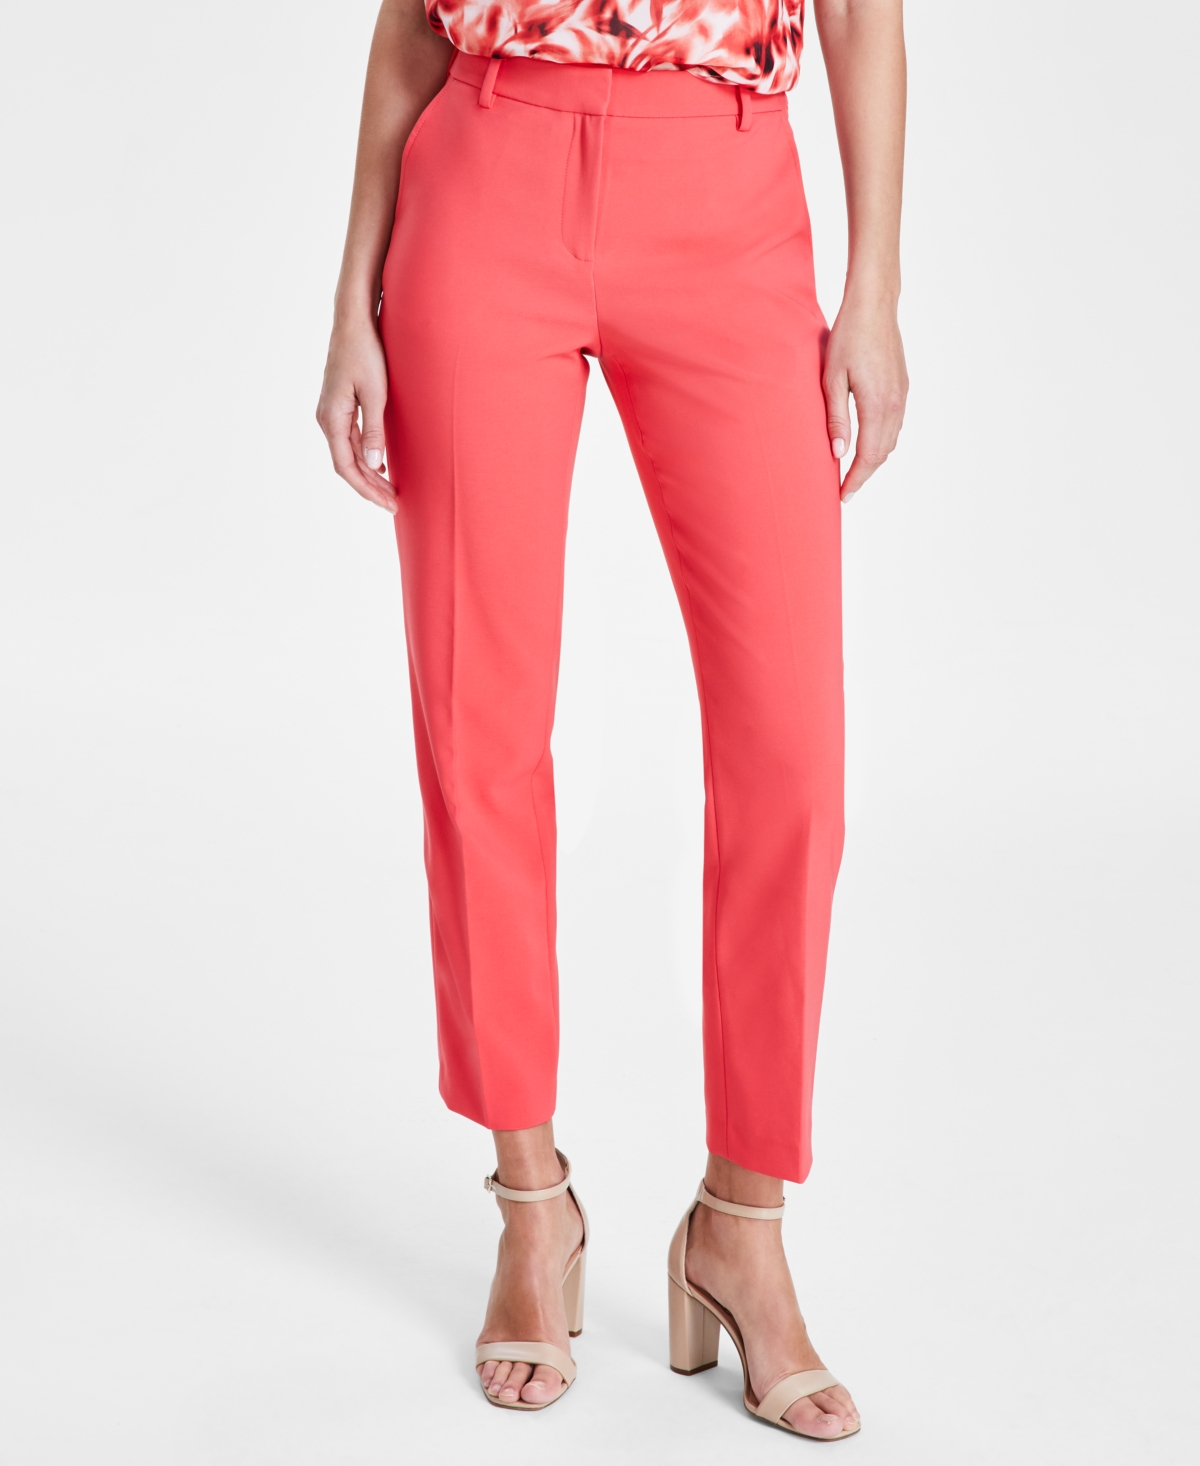 Women's Straight-Leg Mid-Rise Pants, Created for Macy's - Red Pear